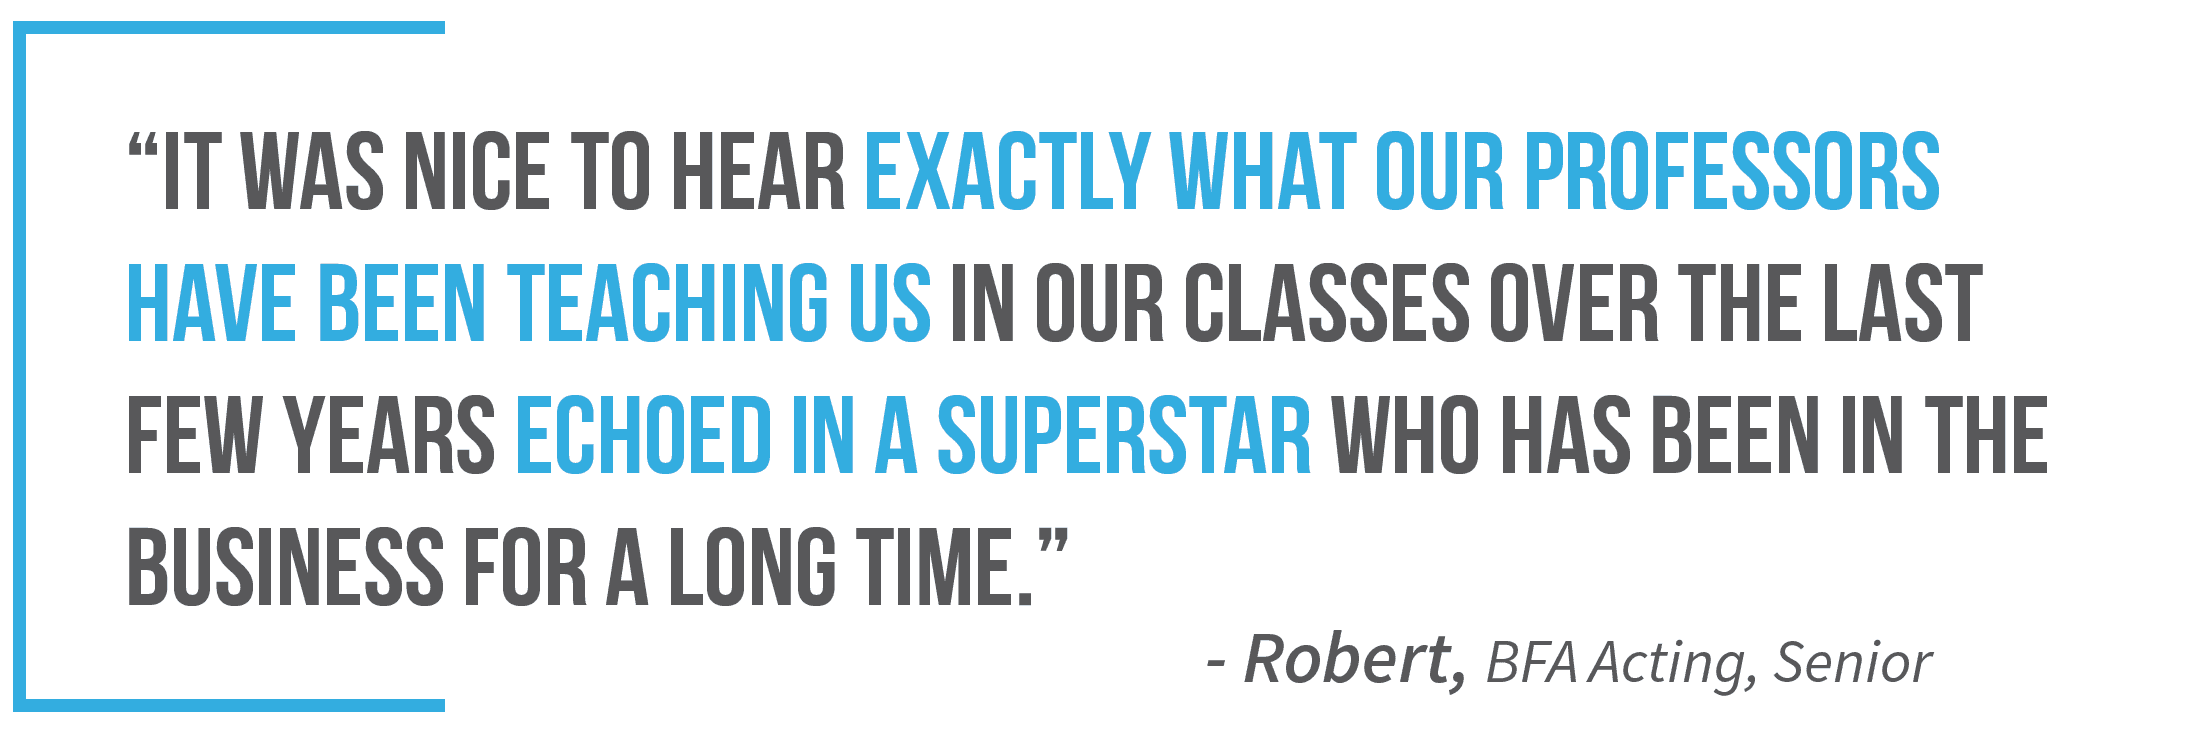 "It was nice to hear exactly what our professors have been teaching us in our classes over the last few years echoed in a superstar who has been in the business for a long time." —Robert, B F A Acting, Senior